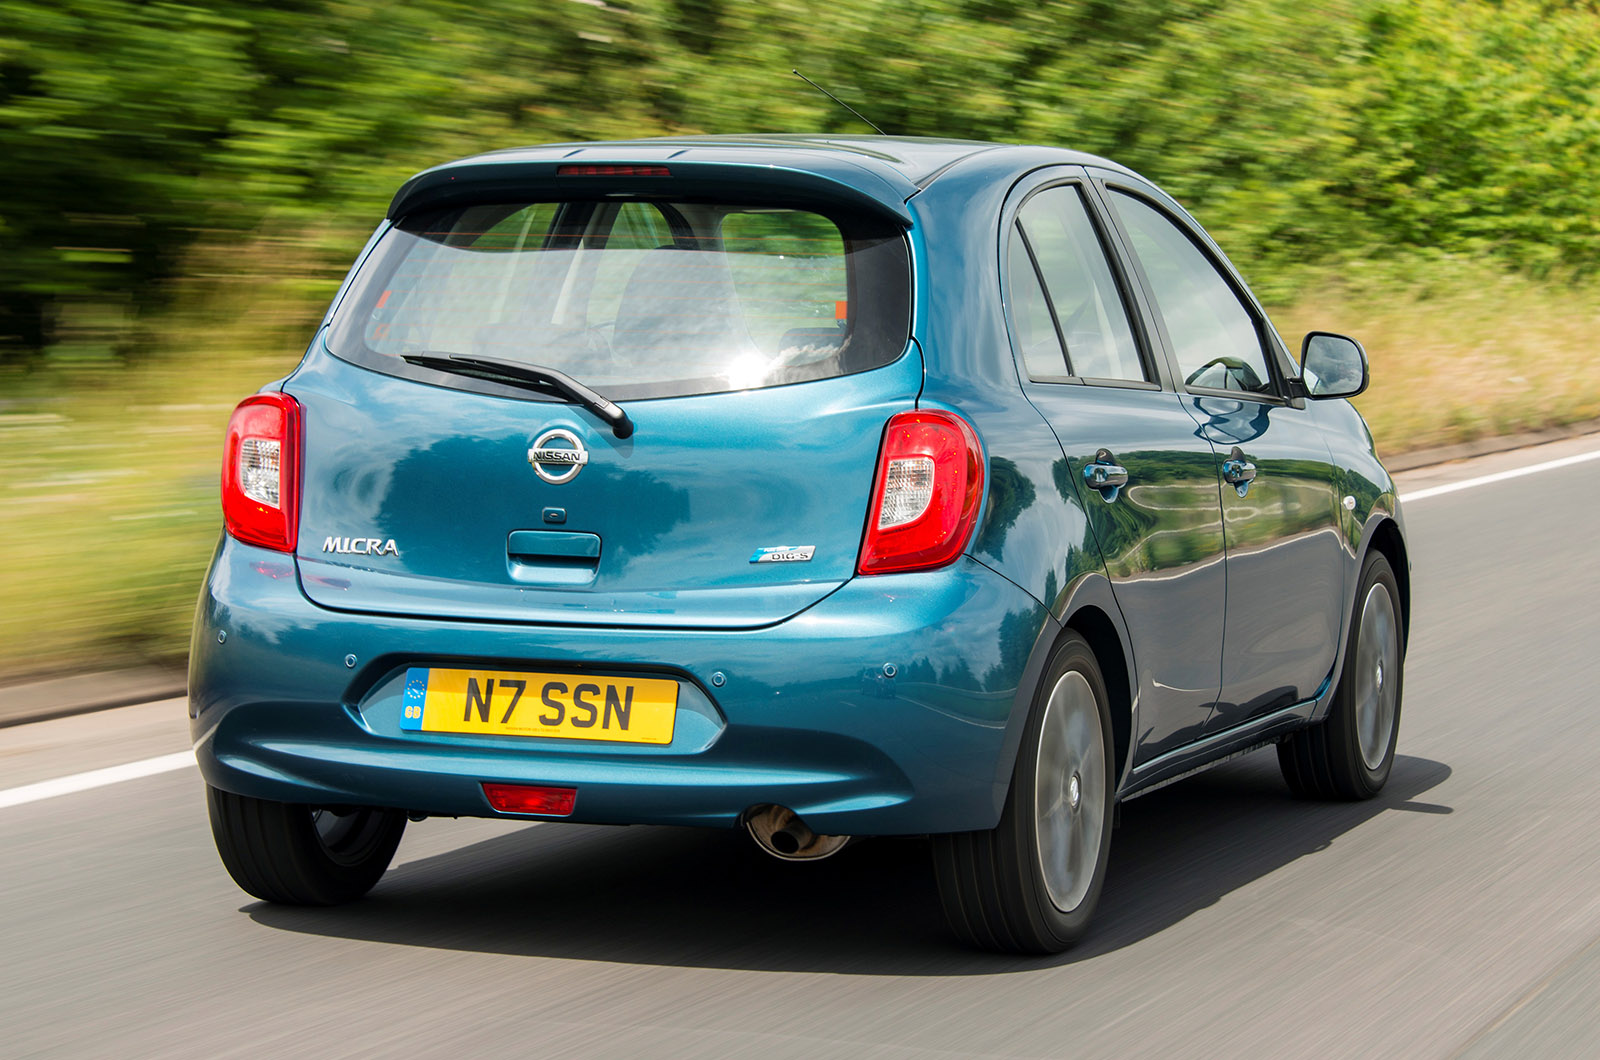 Used Nissan Micra 2010-2017 review